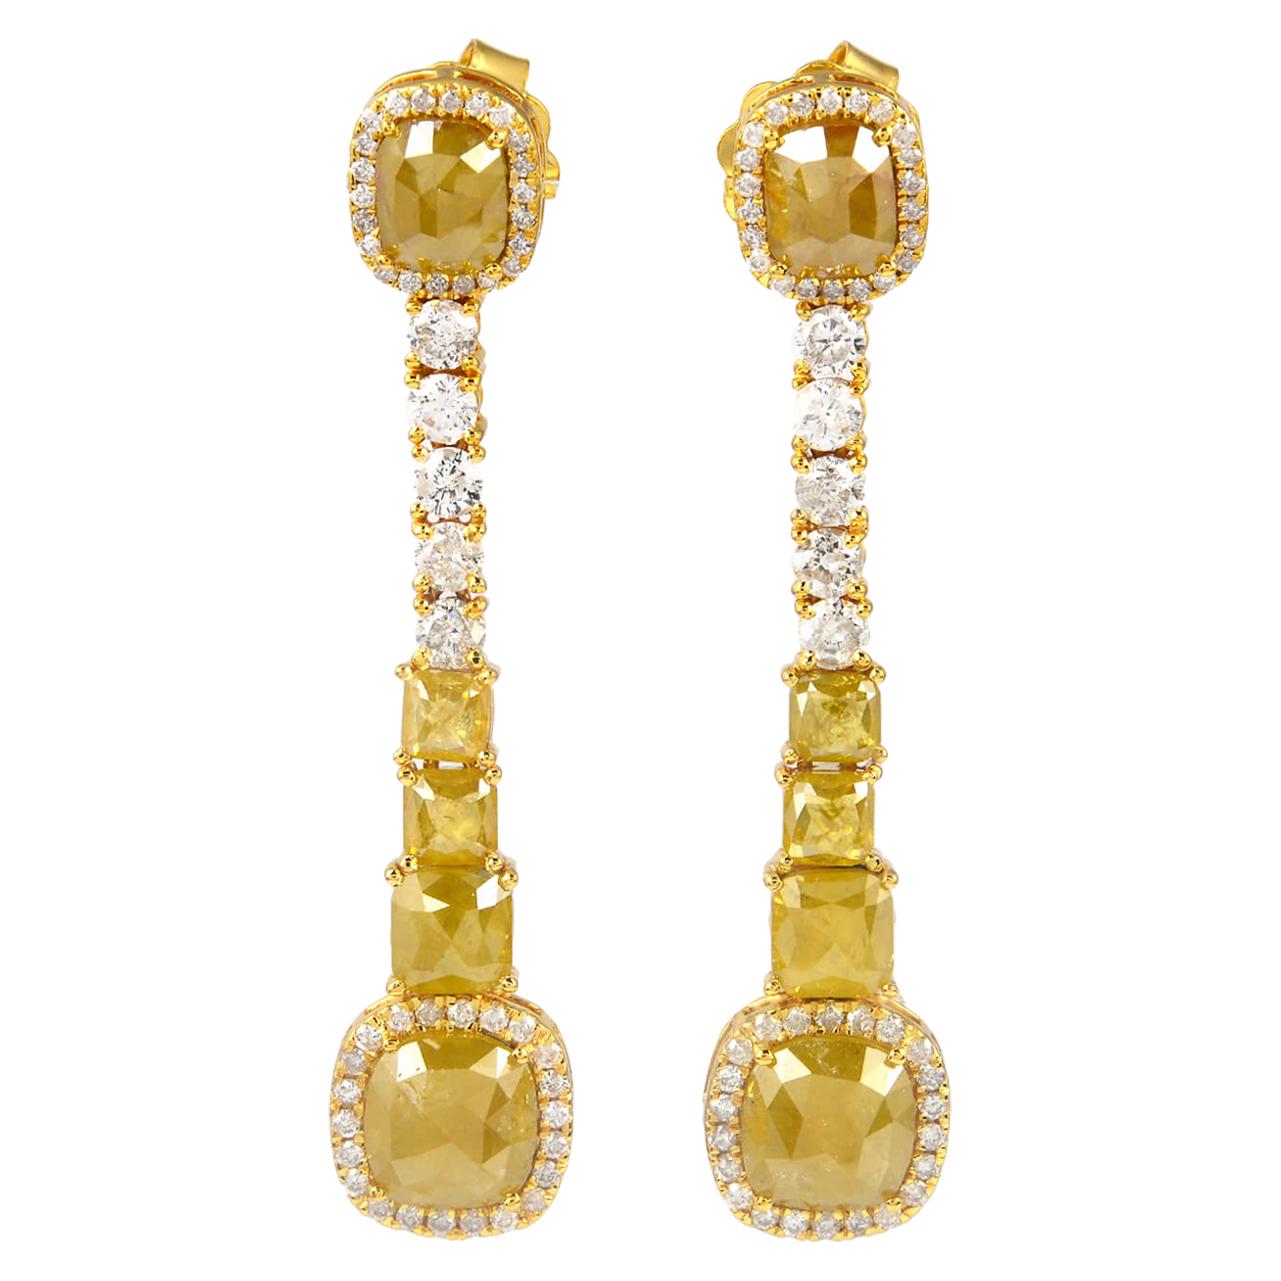 Multishaped Fancy Yellow and White Diamond Earring in 18 Karat Yellow Gold For Sale